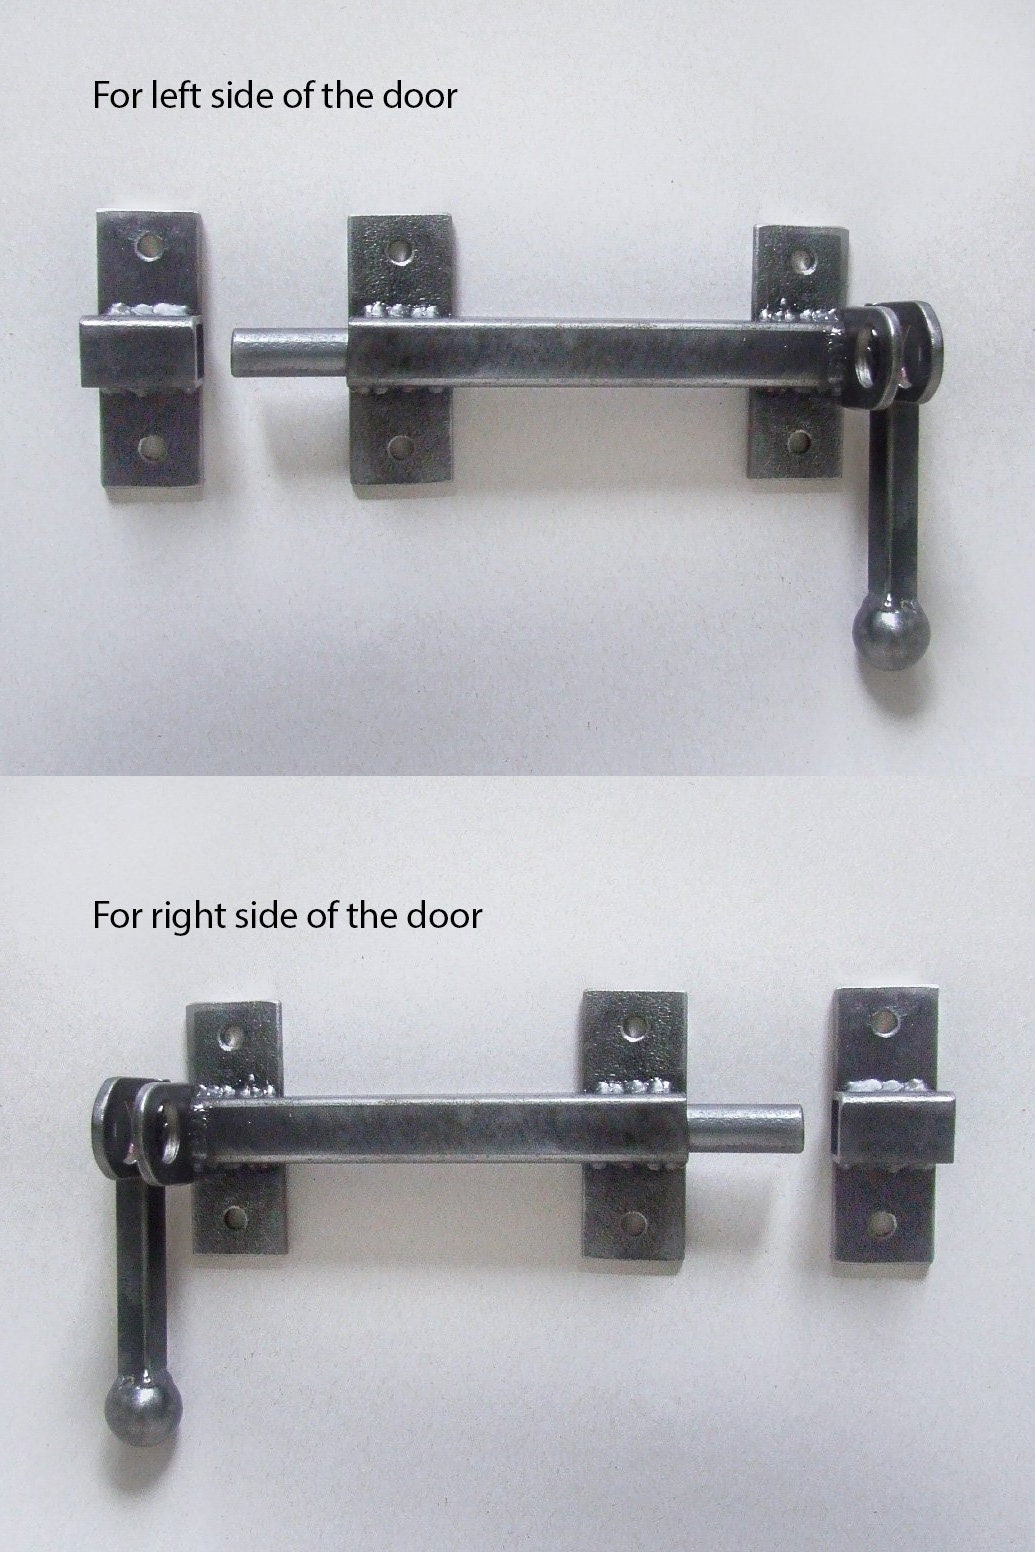 How To Tell If A Door Handle Is Left Or Right - The Handmade